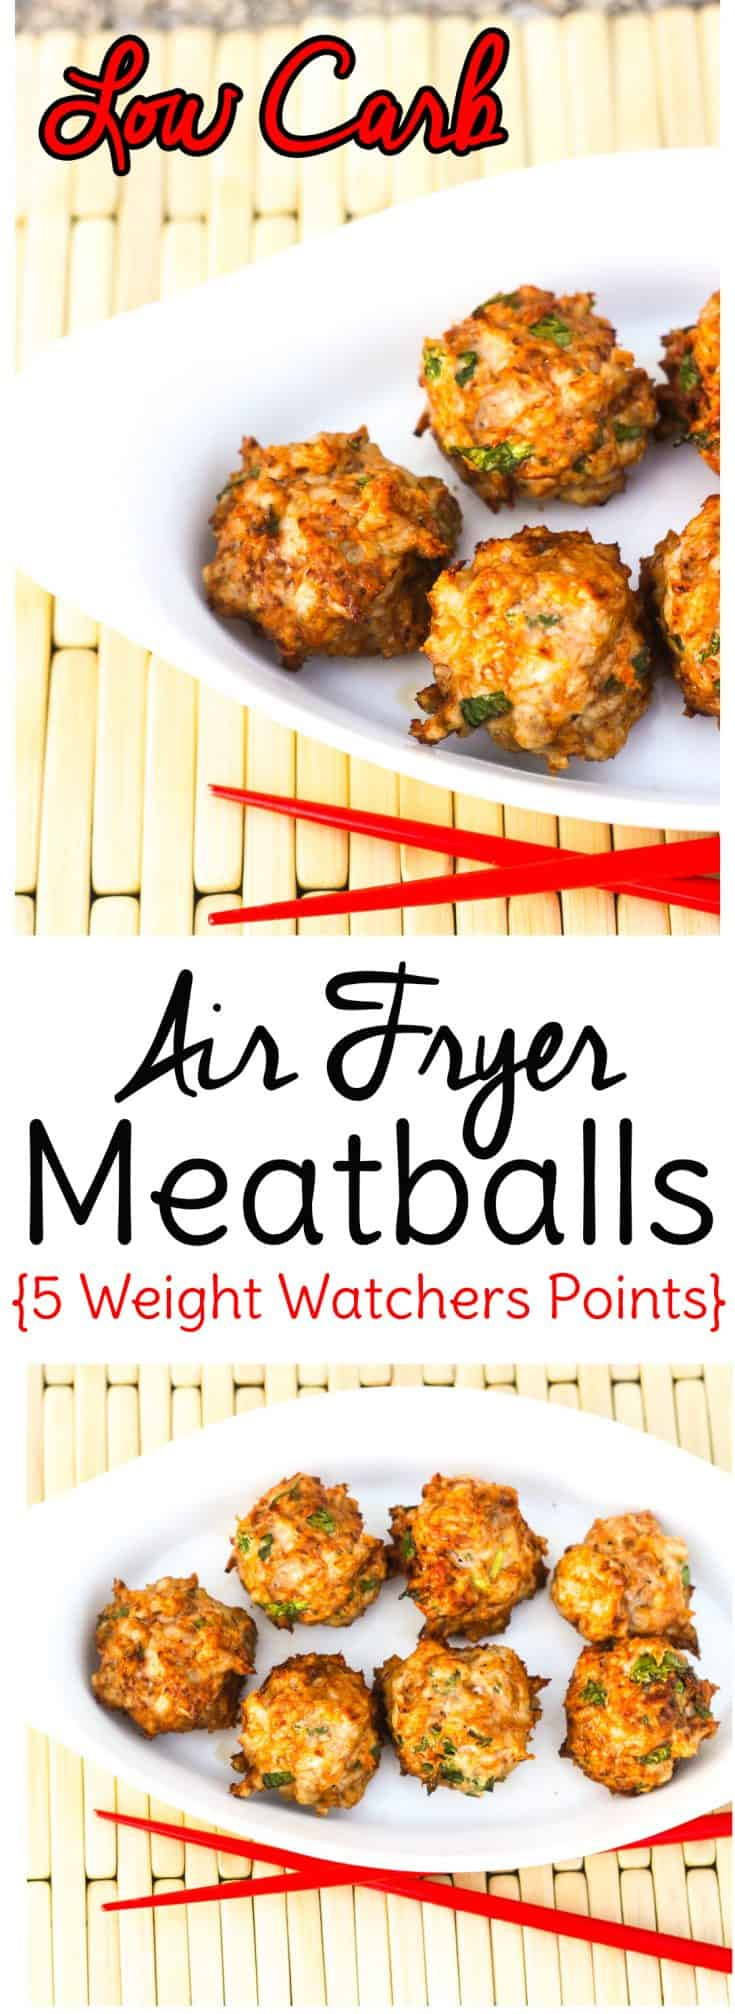 Low Carb Air Fryer Recipes
 Low Carb Meatballs in the Airfryer 5 Weight Watchers Points